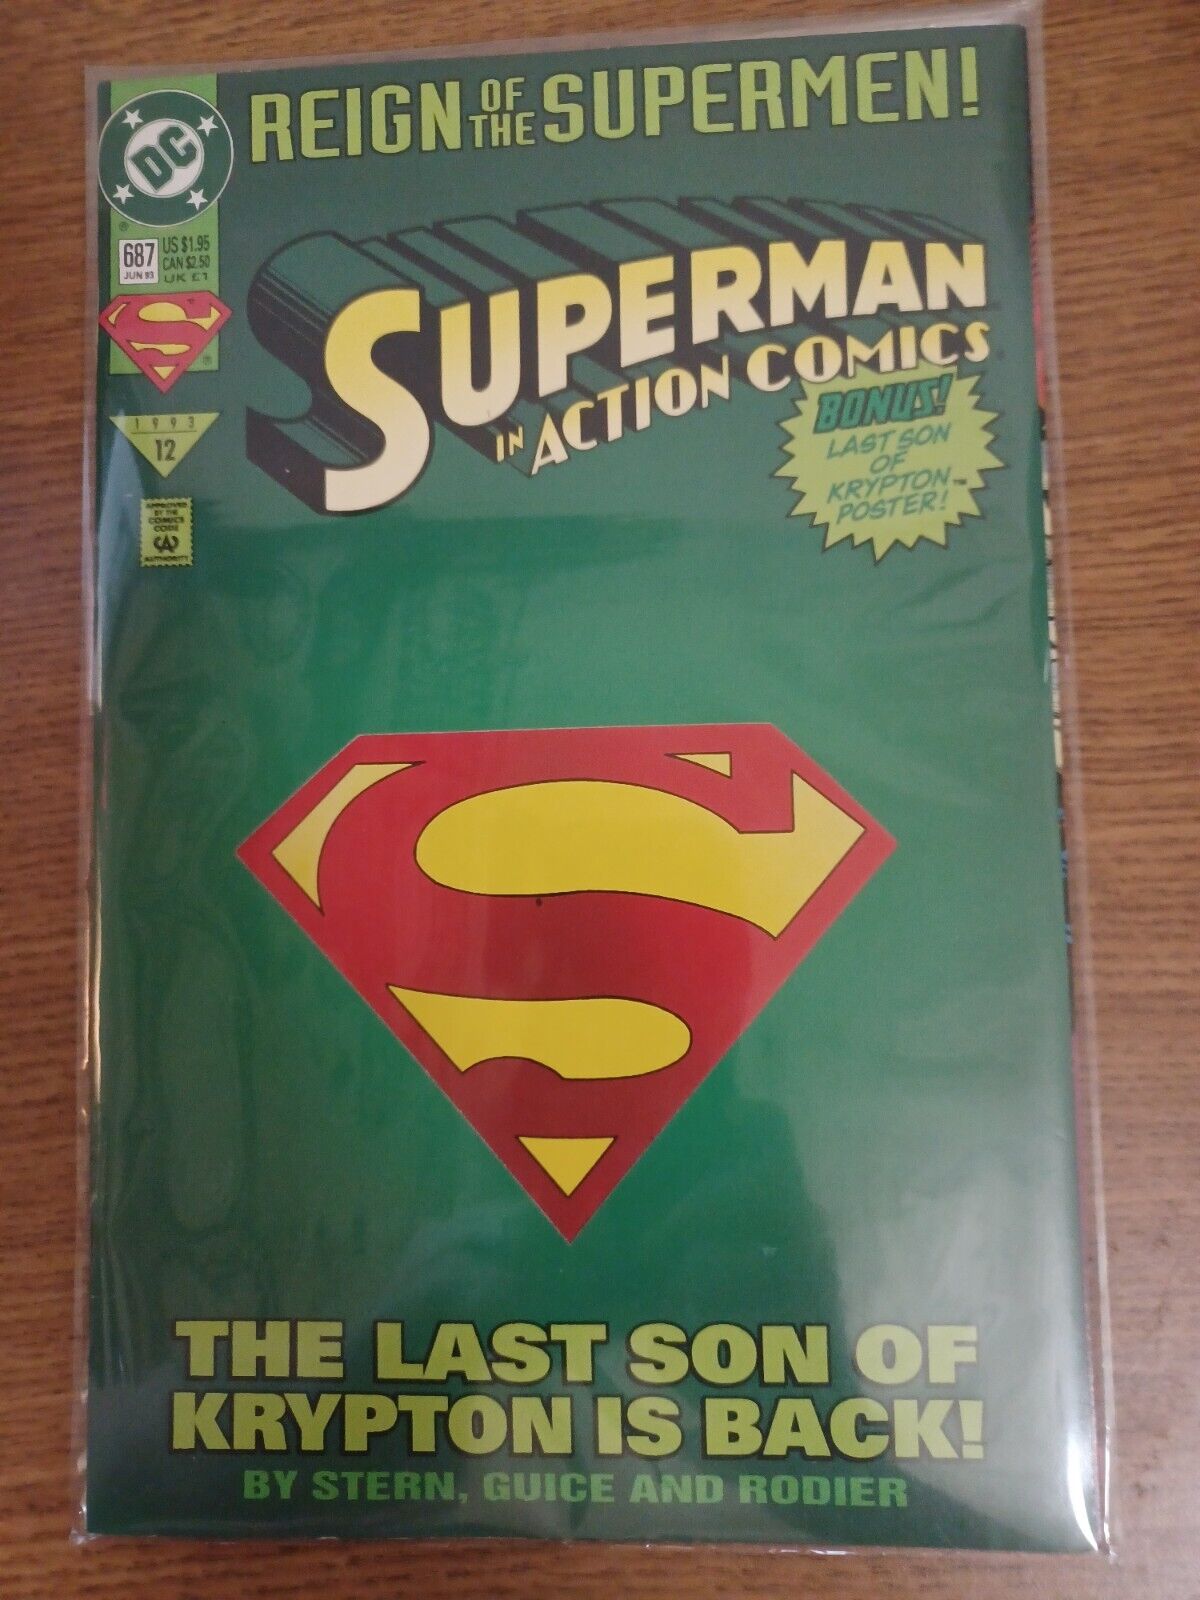 Reign of the Supermen The Last Son of Krypton is Back #687 Die-cut New in Sleeve